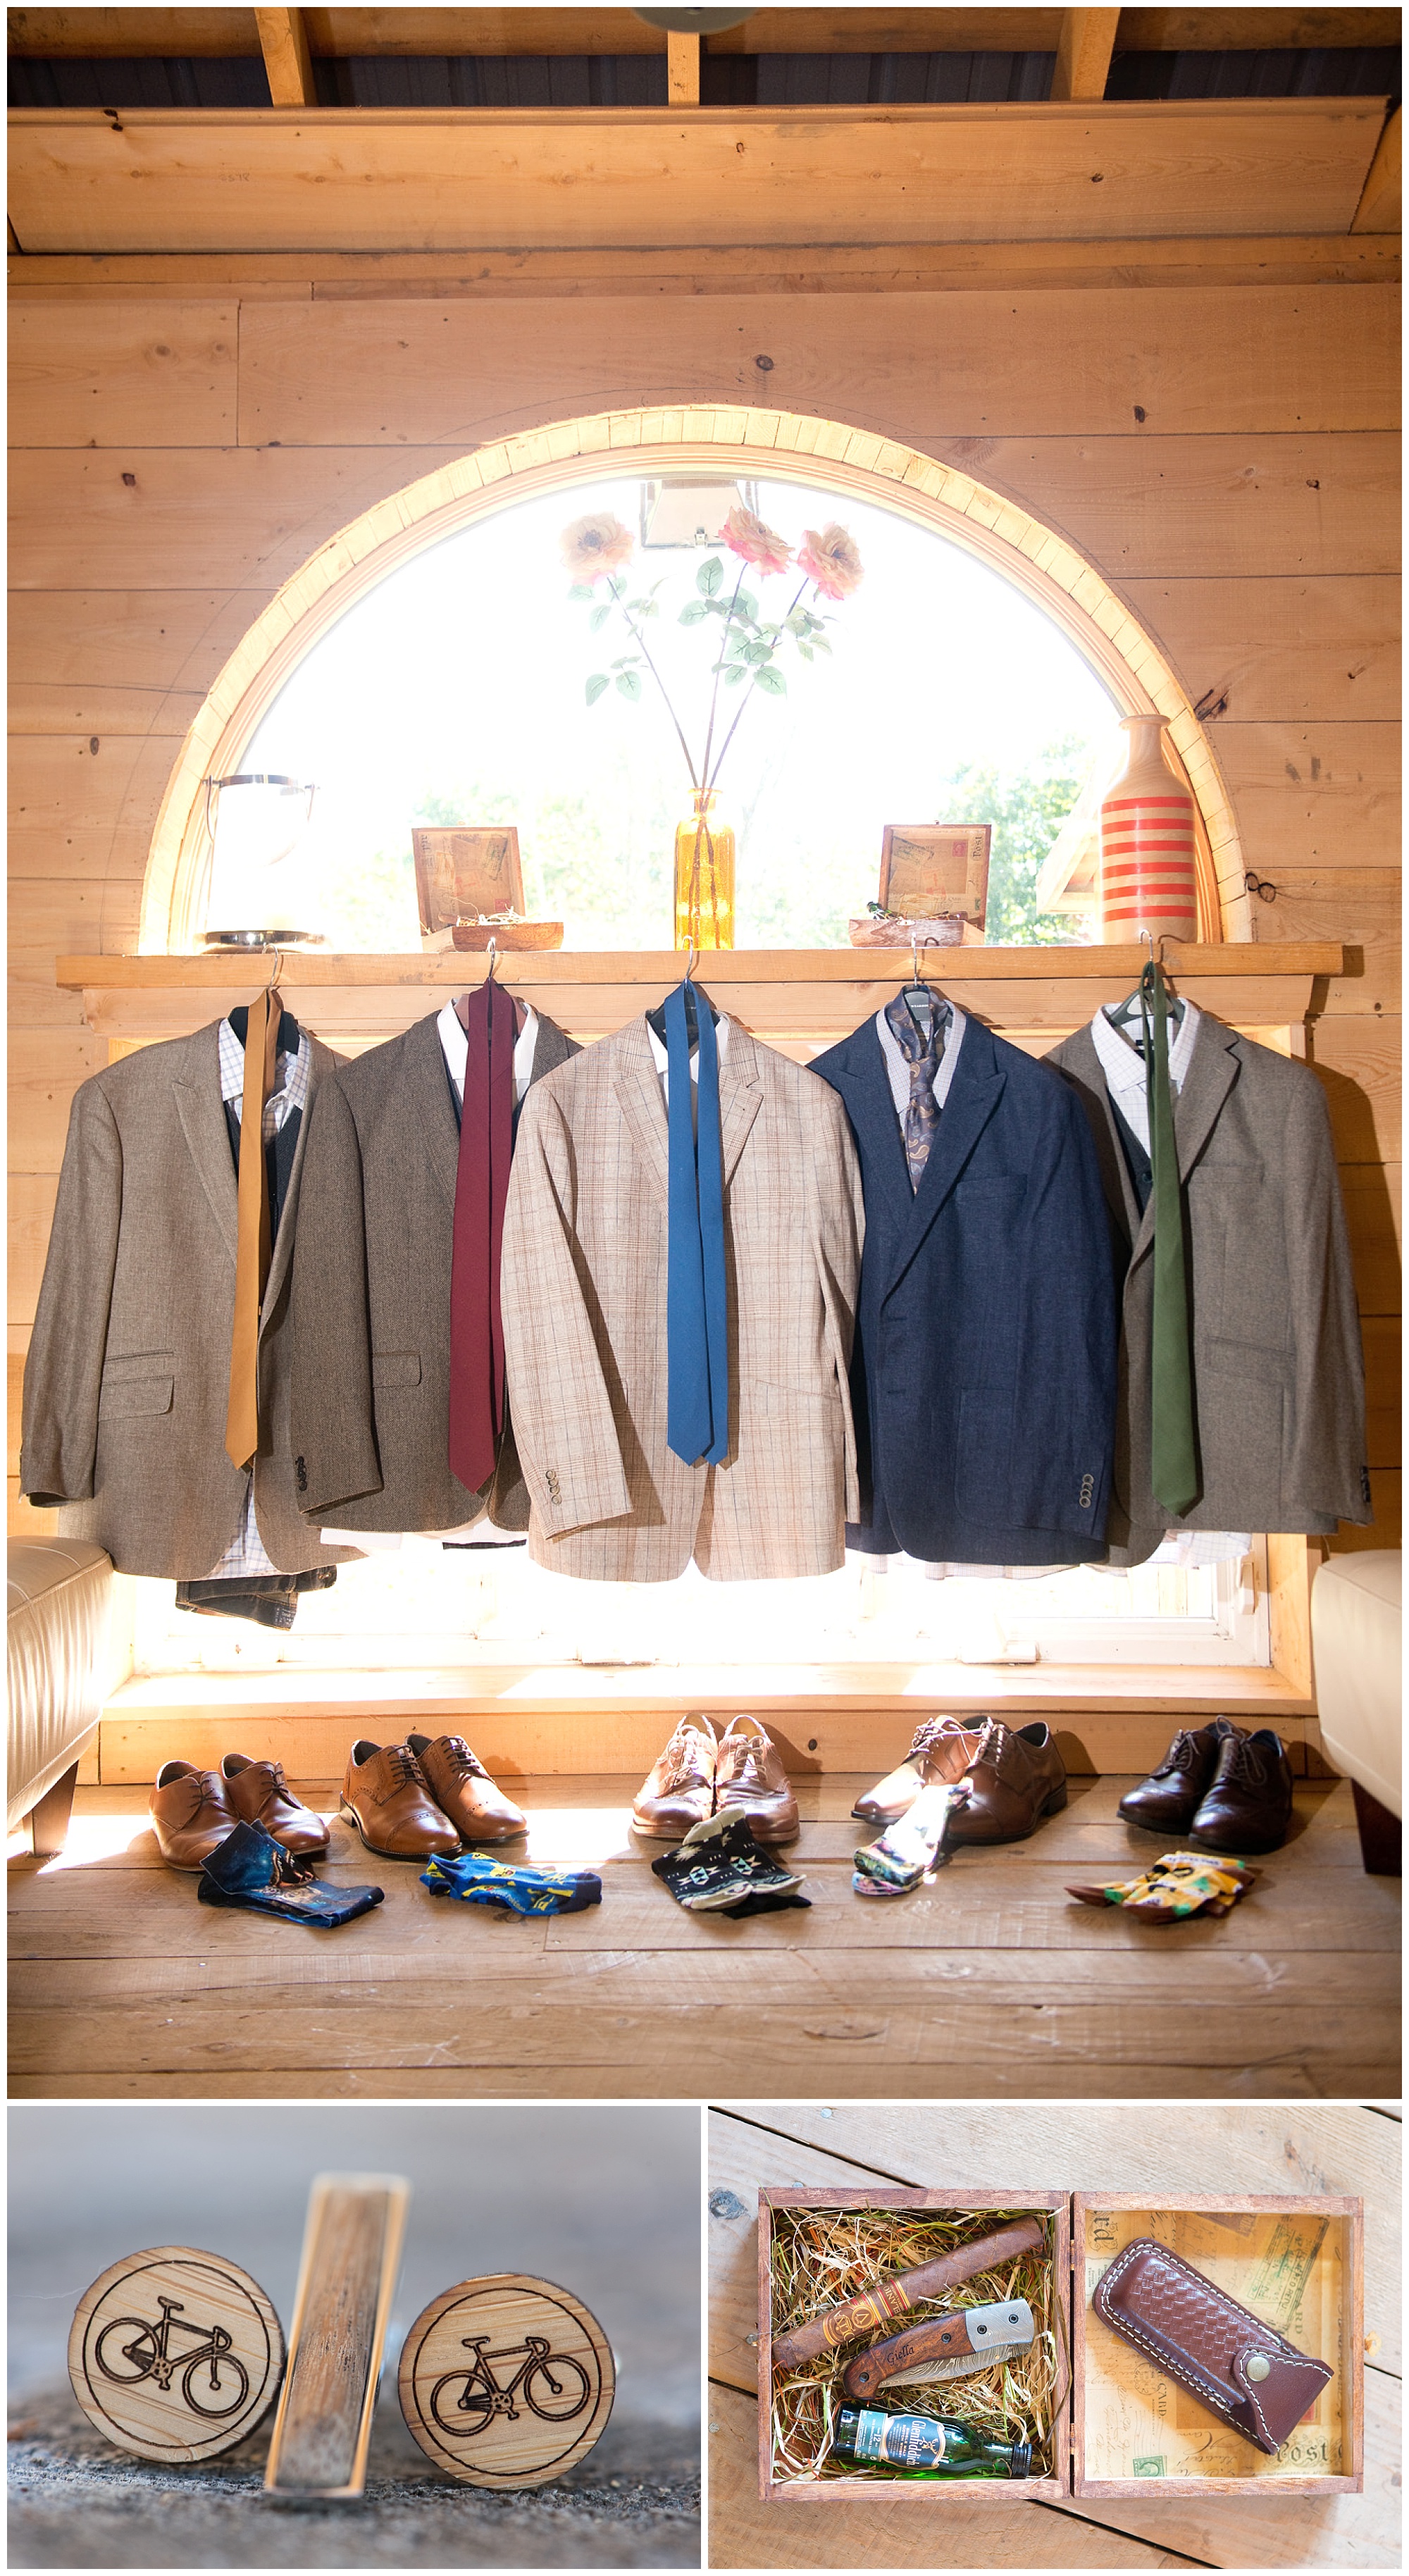  The grooms and groomsmen attire on display back-lighted